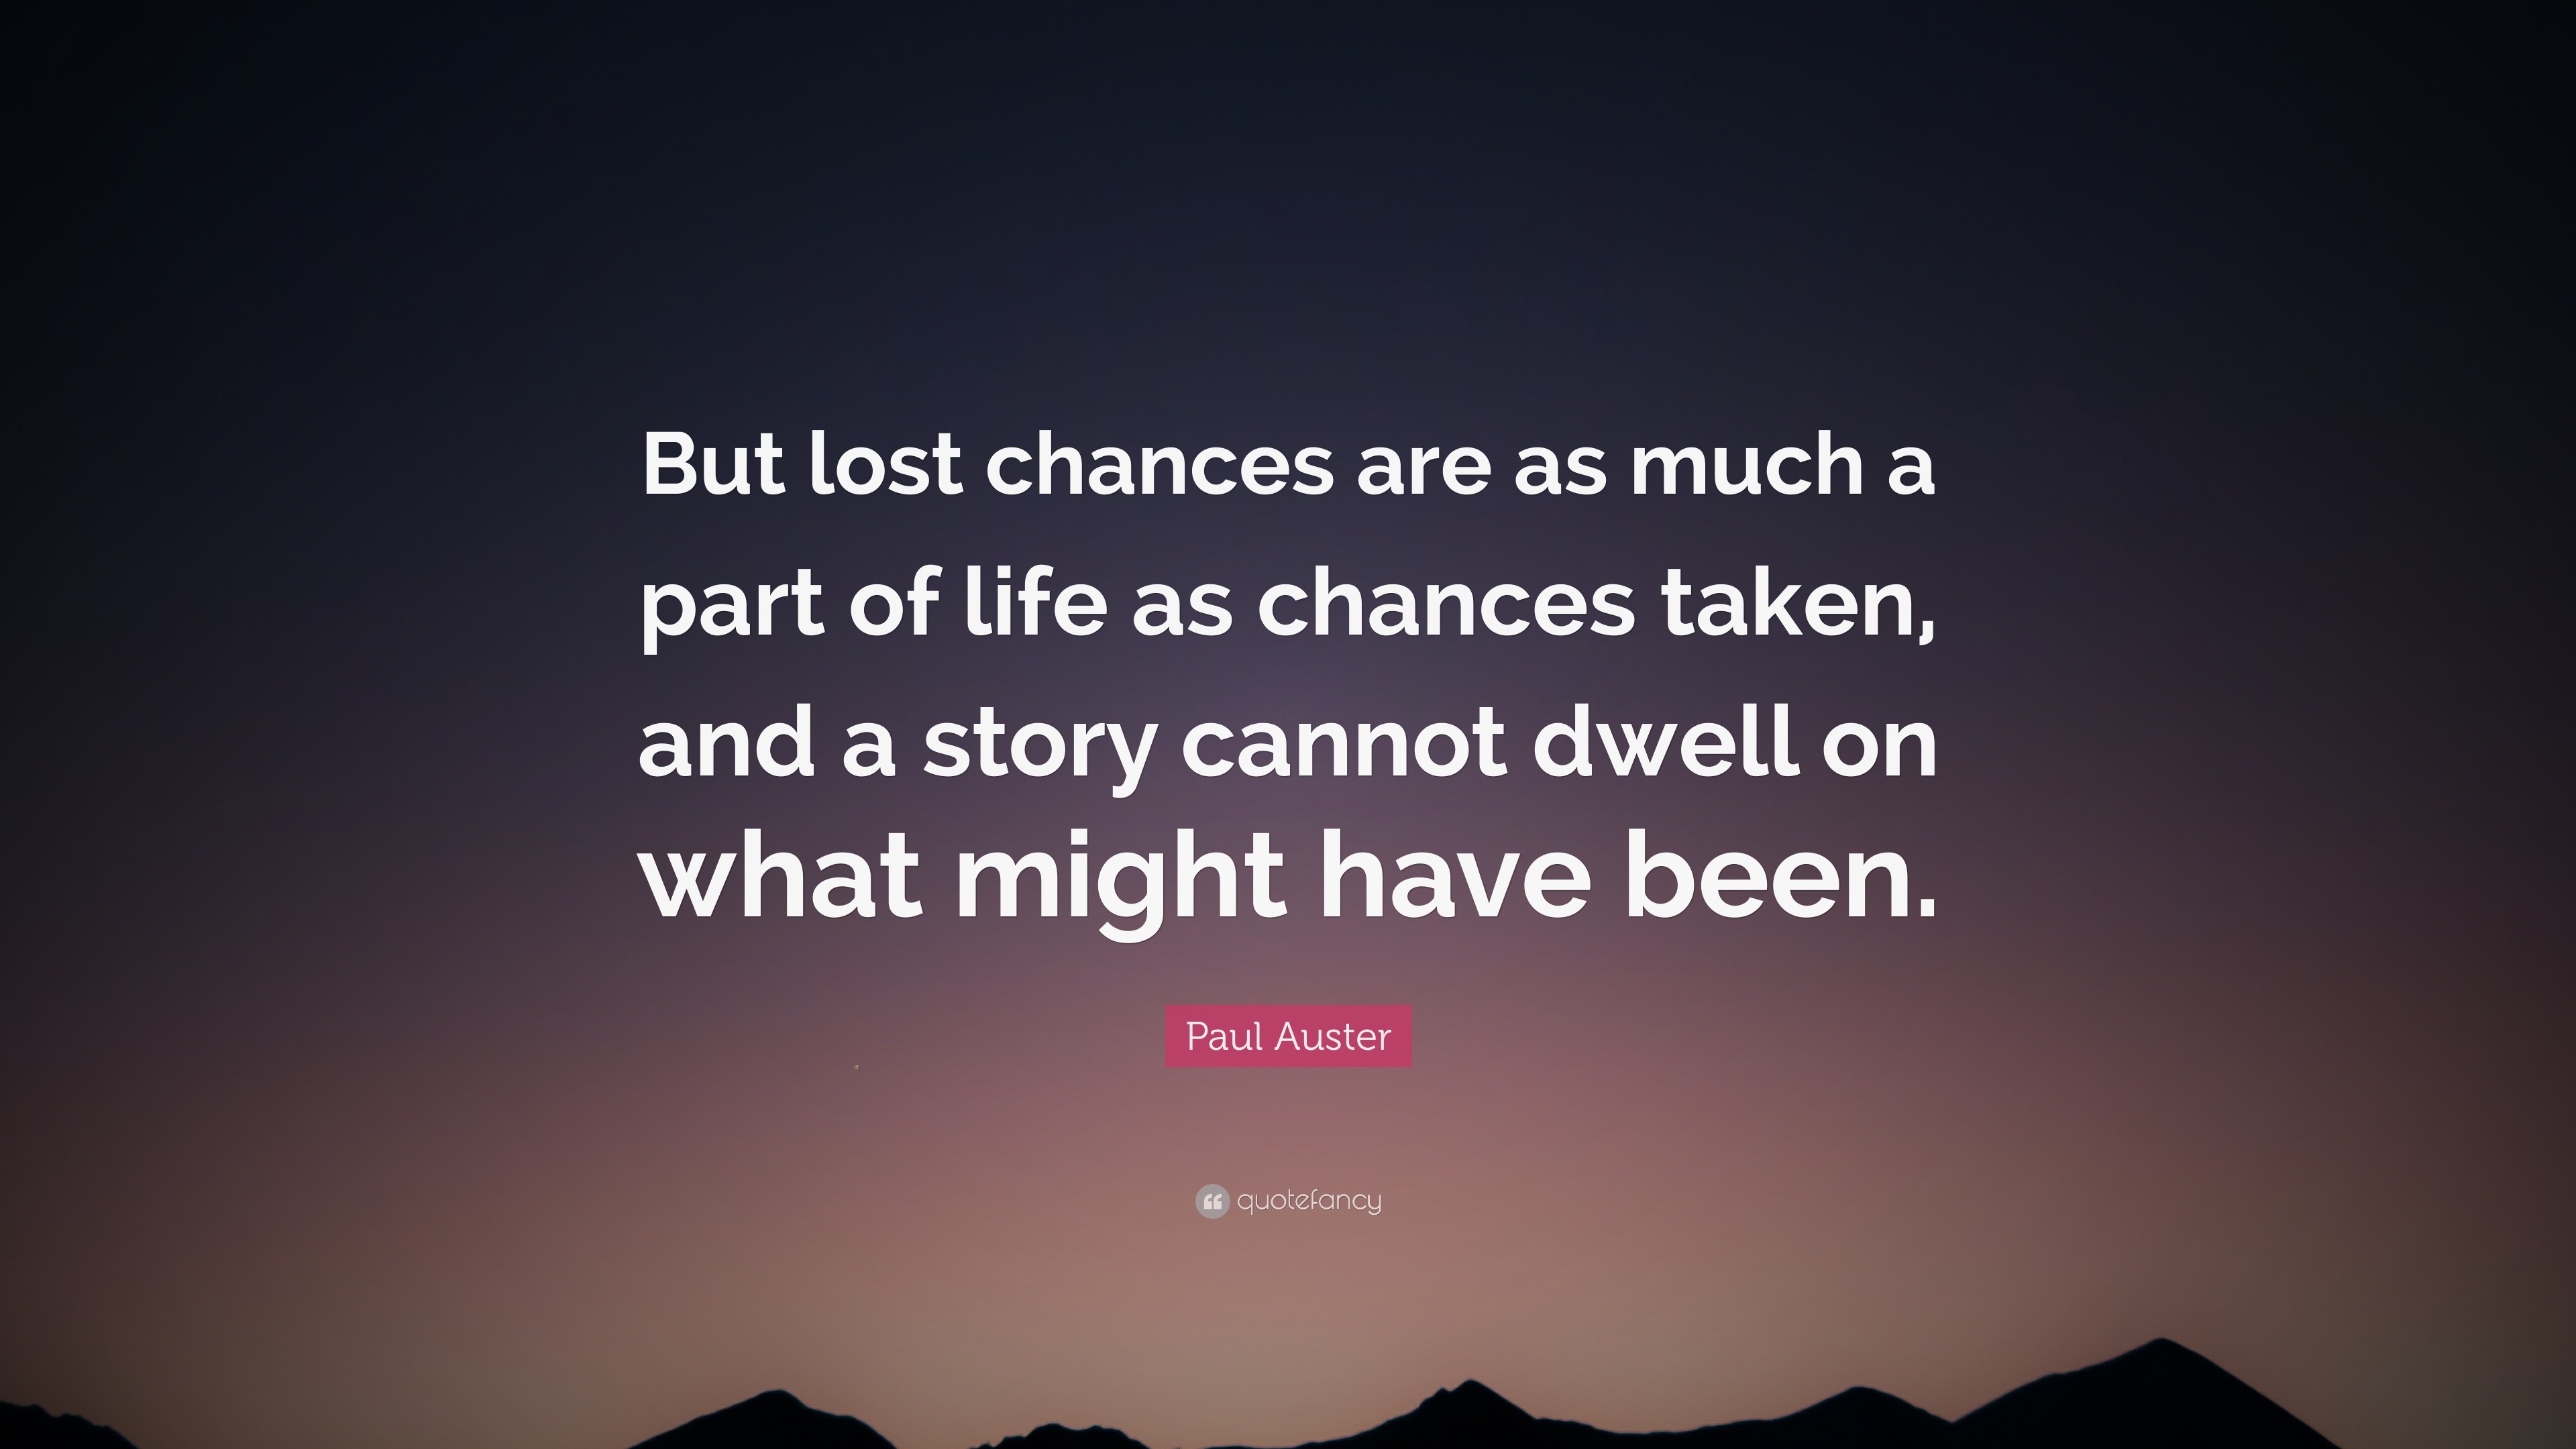 Paul Auster Quote: “But lost chances are as much a part of life as ...